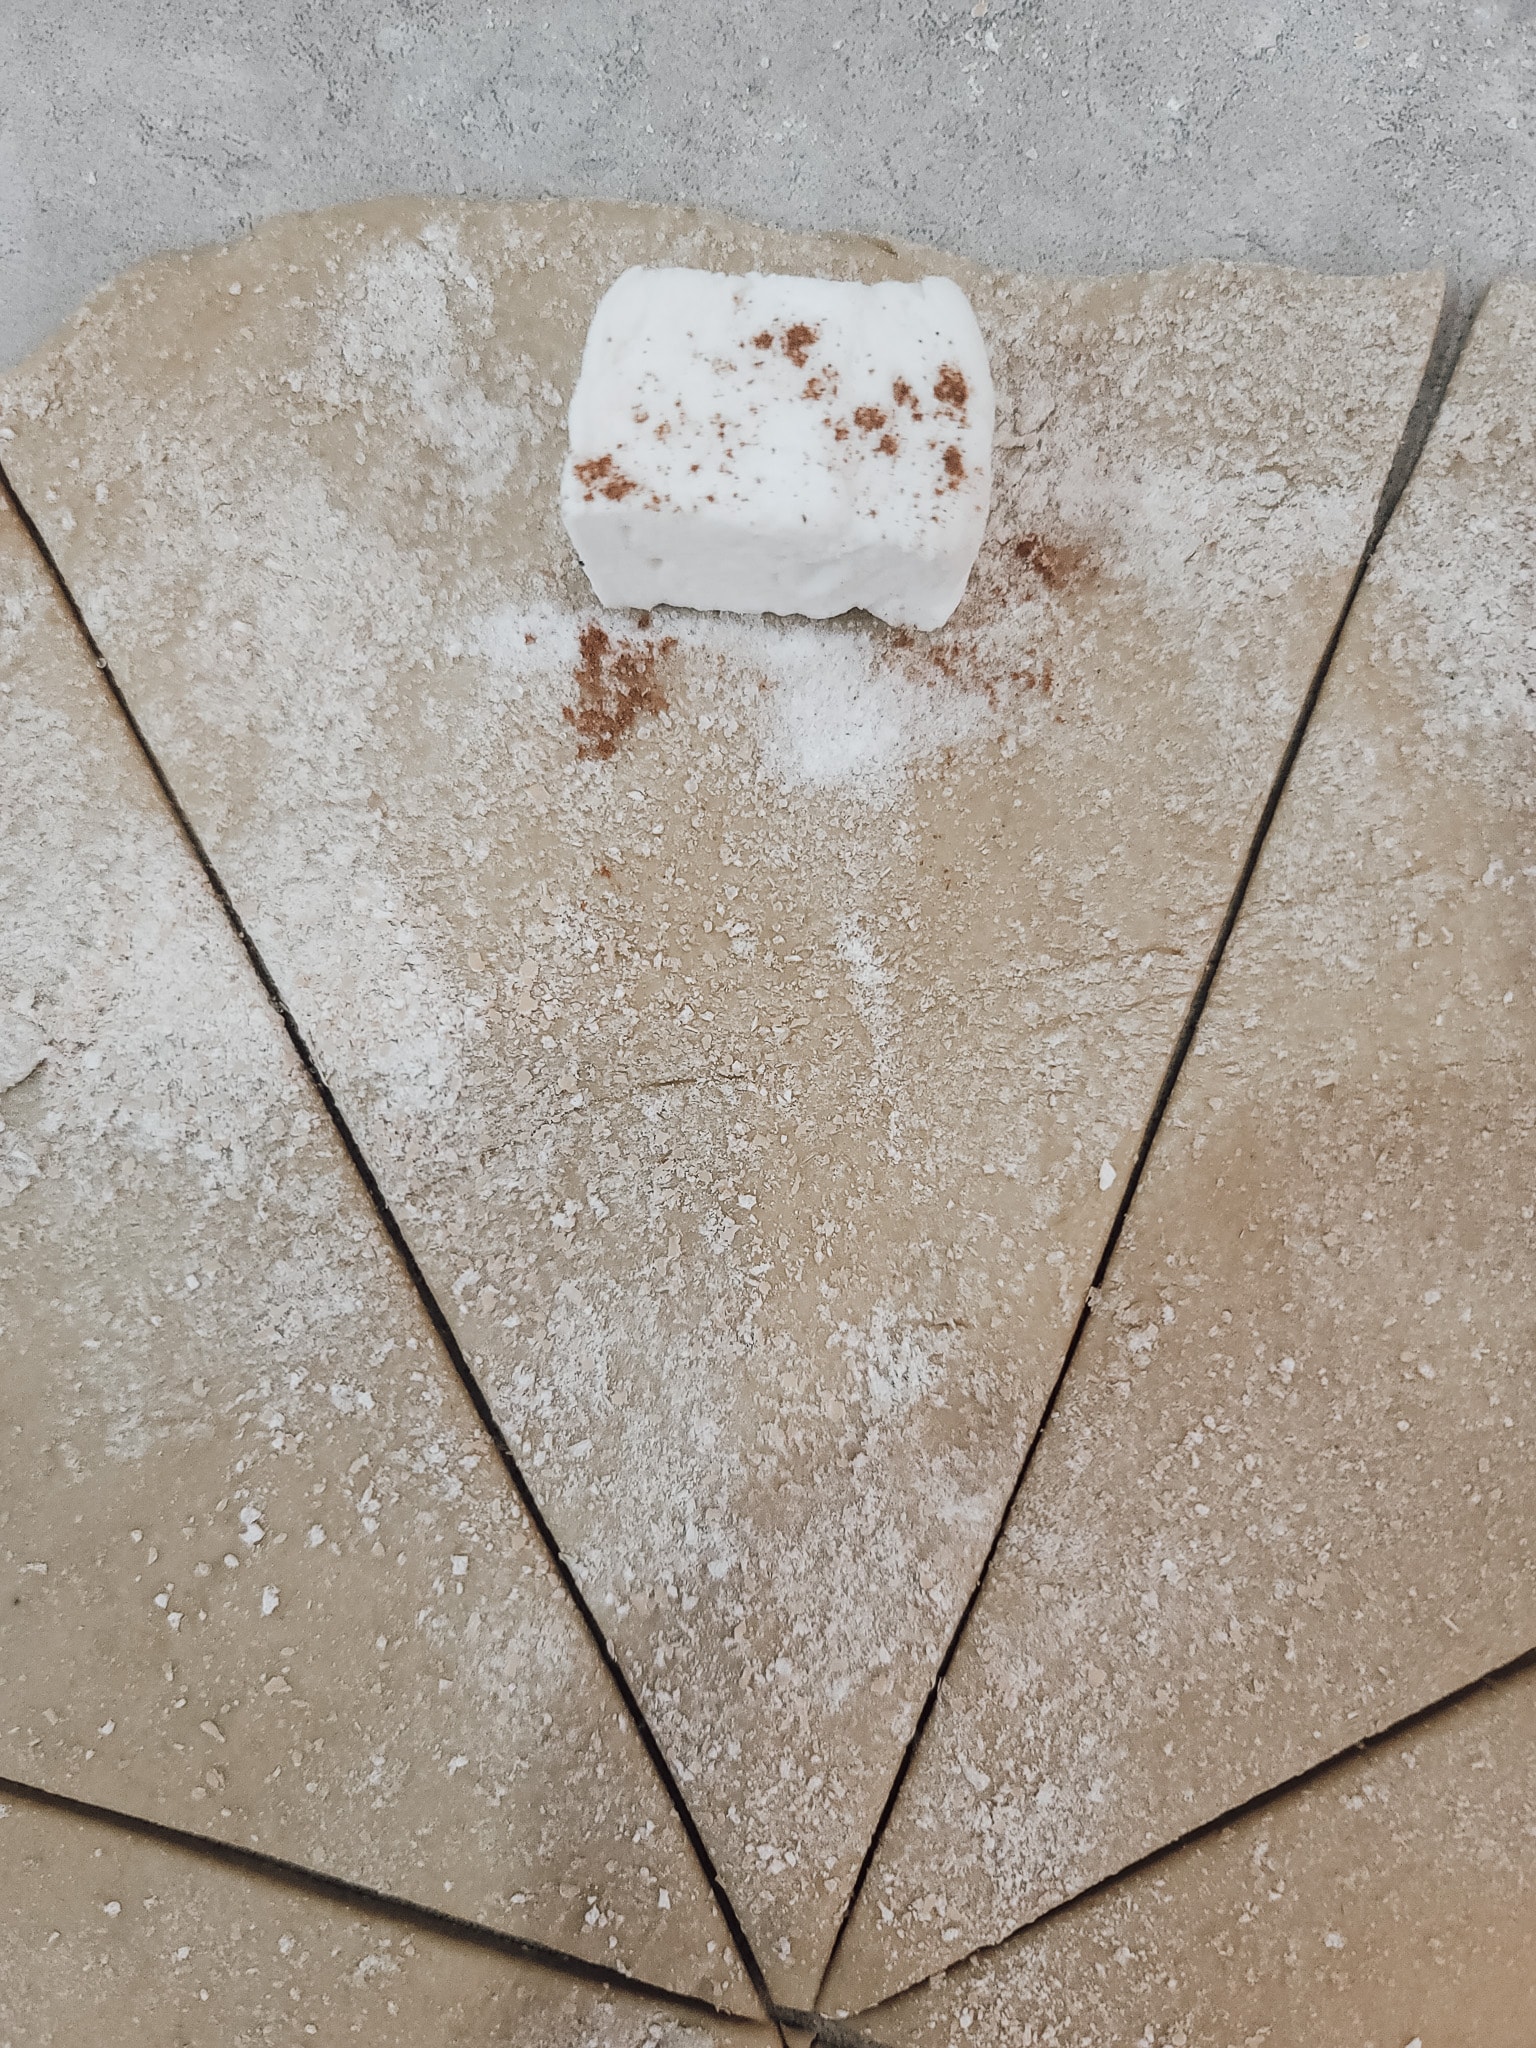 Place a Max Mellows Marshmellow on the thicker end of each triangle. Optional - sprinkle with Gentle Sweet and cinnamon. Roll up each triangular dough piece into a crescent shape and place it on a parchment or silicon-lined baking sheet. Cover with a tea towel.  homemade resurrection rolls